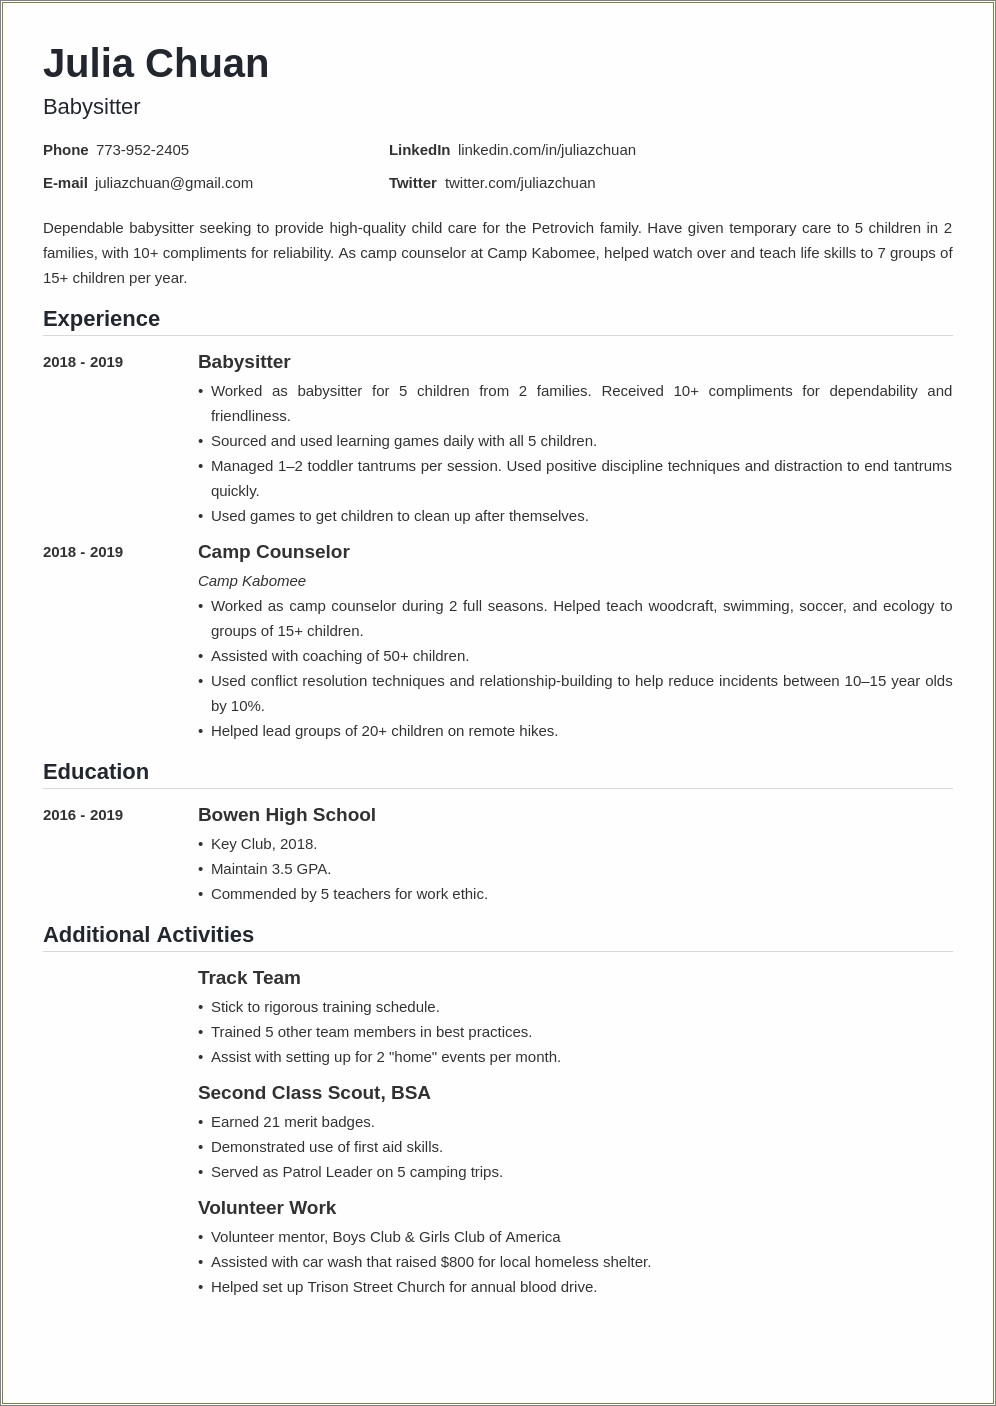 Writing A Resume Objective If Job Is Temperary